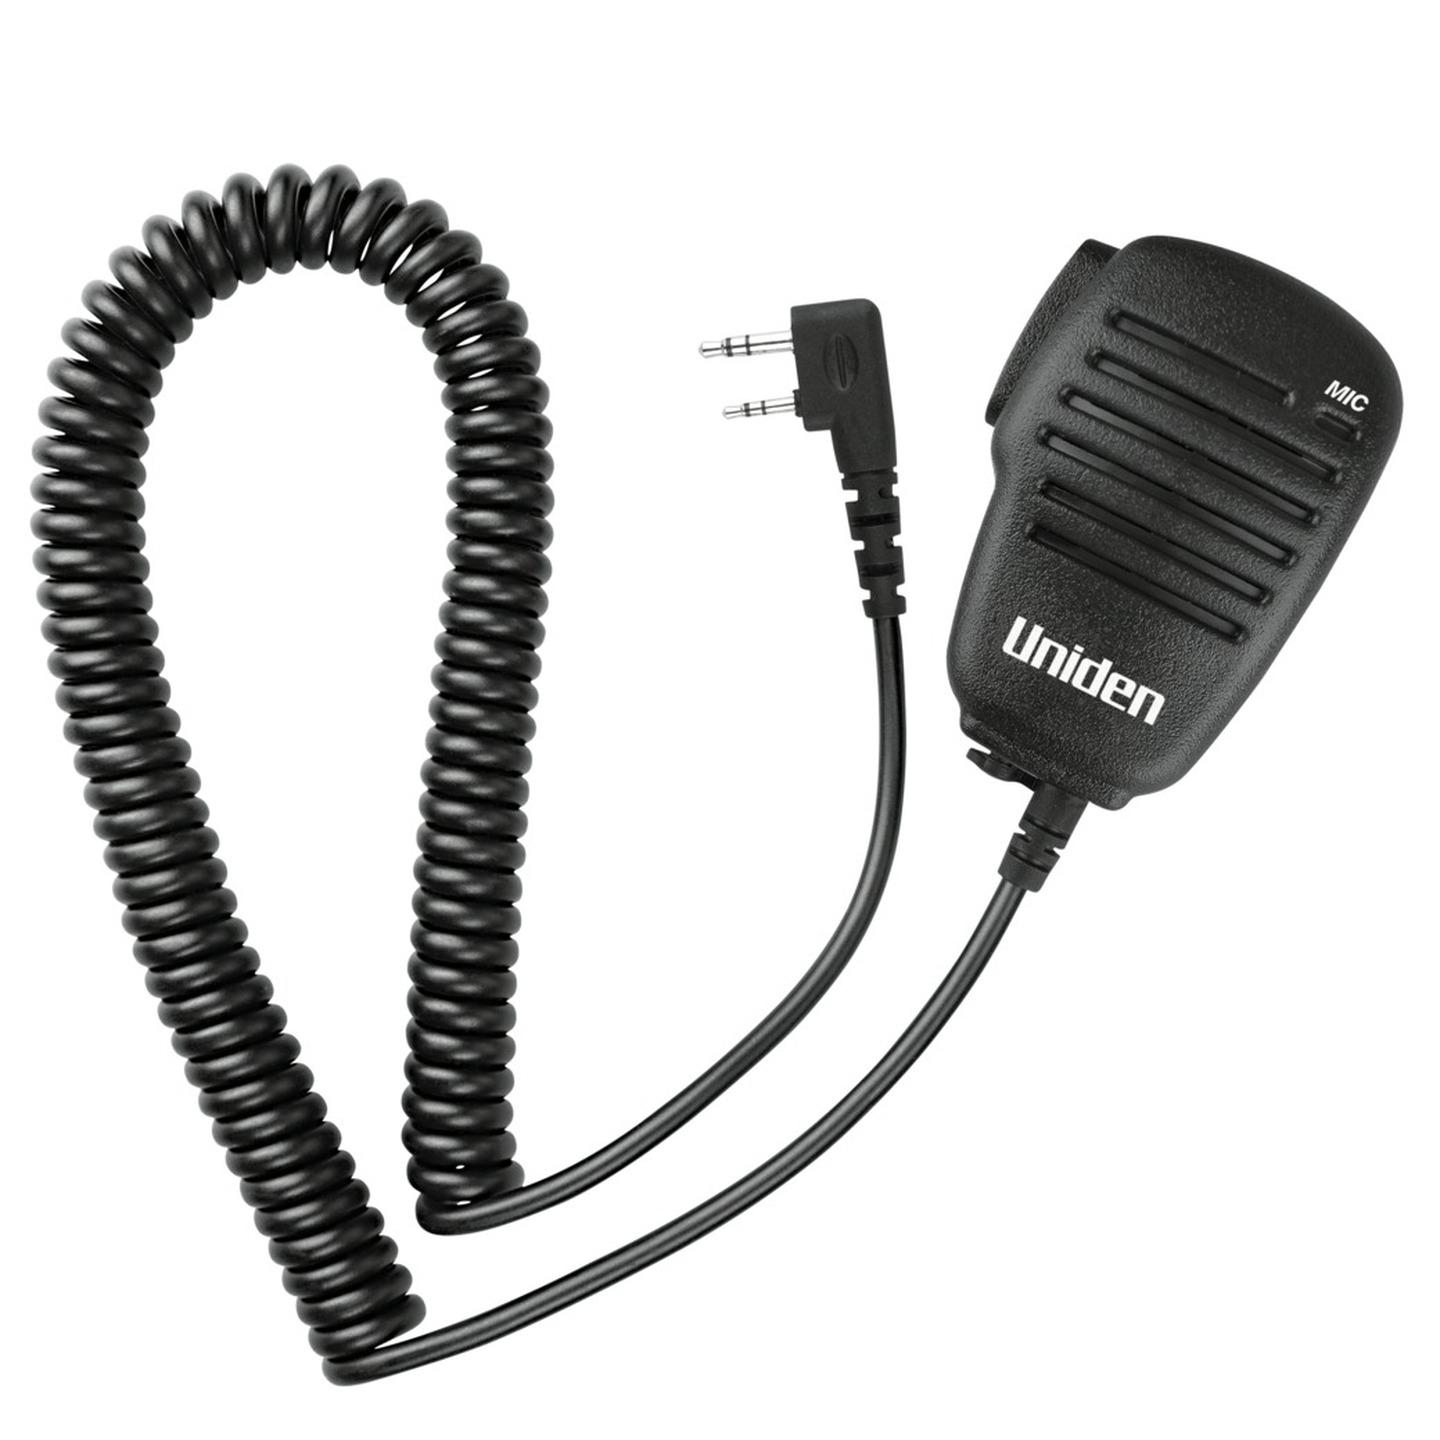 Uniden Speaker Microphone to suit the models UH810S / UH820S / UH835S and UH850S UHF Handheld Radios